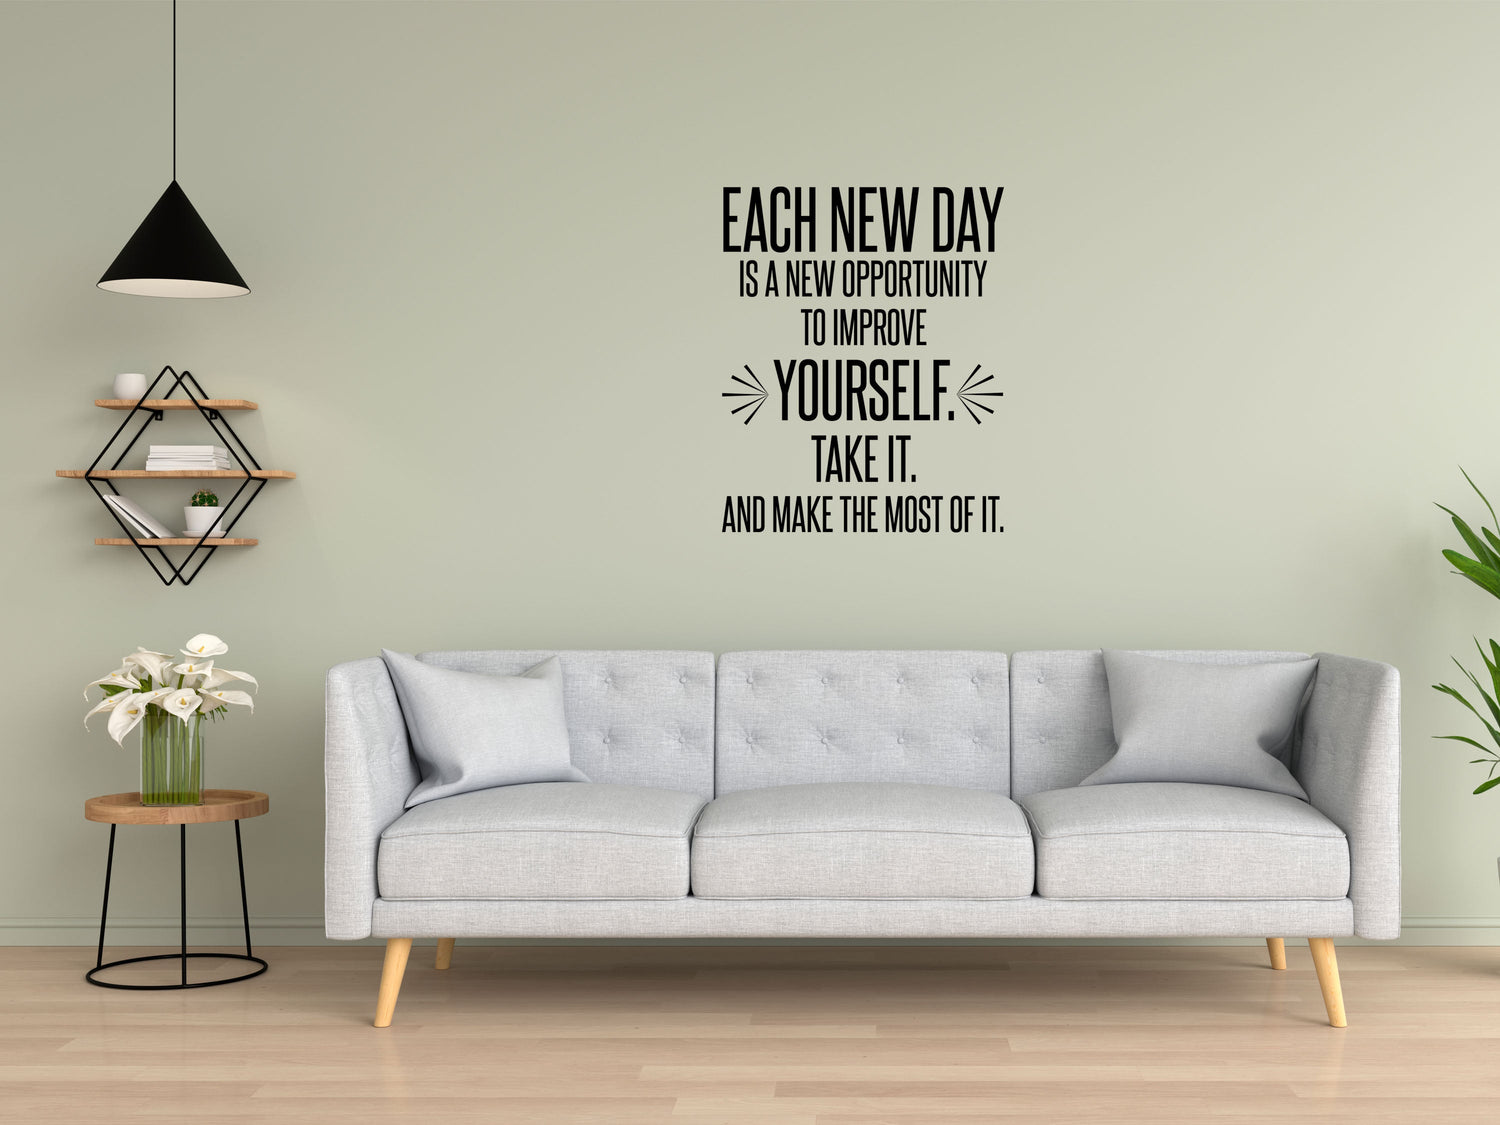 Vinyl Wall Decal Motivation Quotes Office Home Inspiration